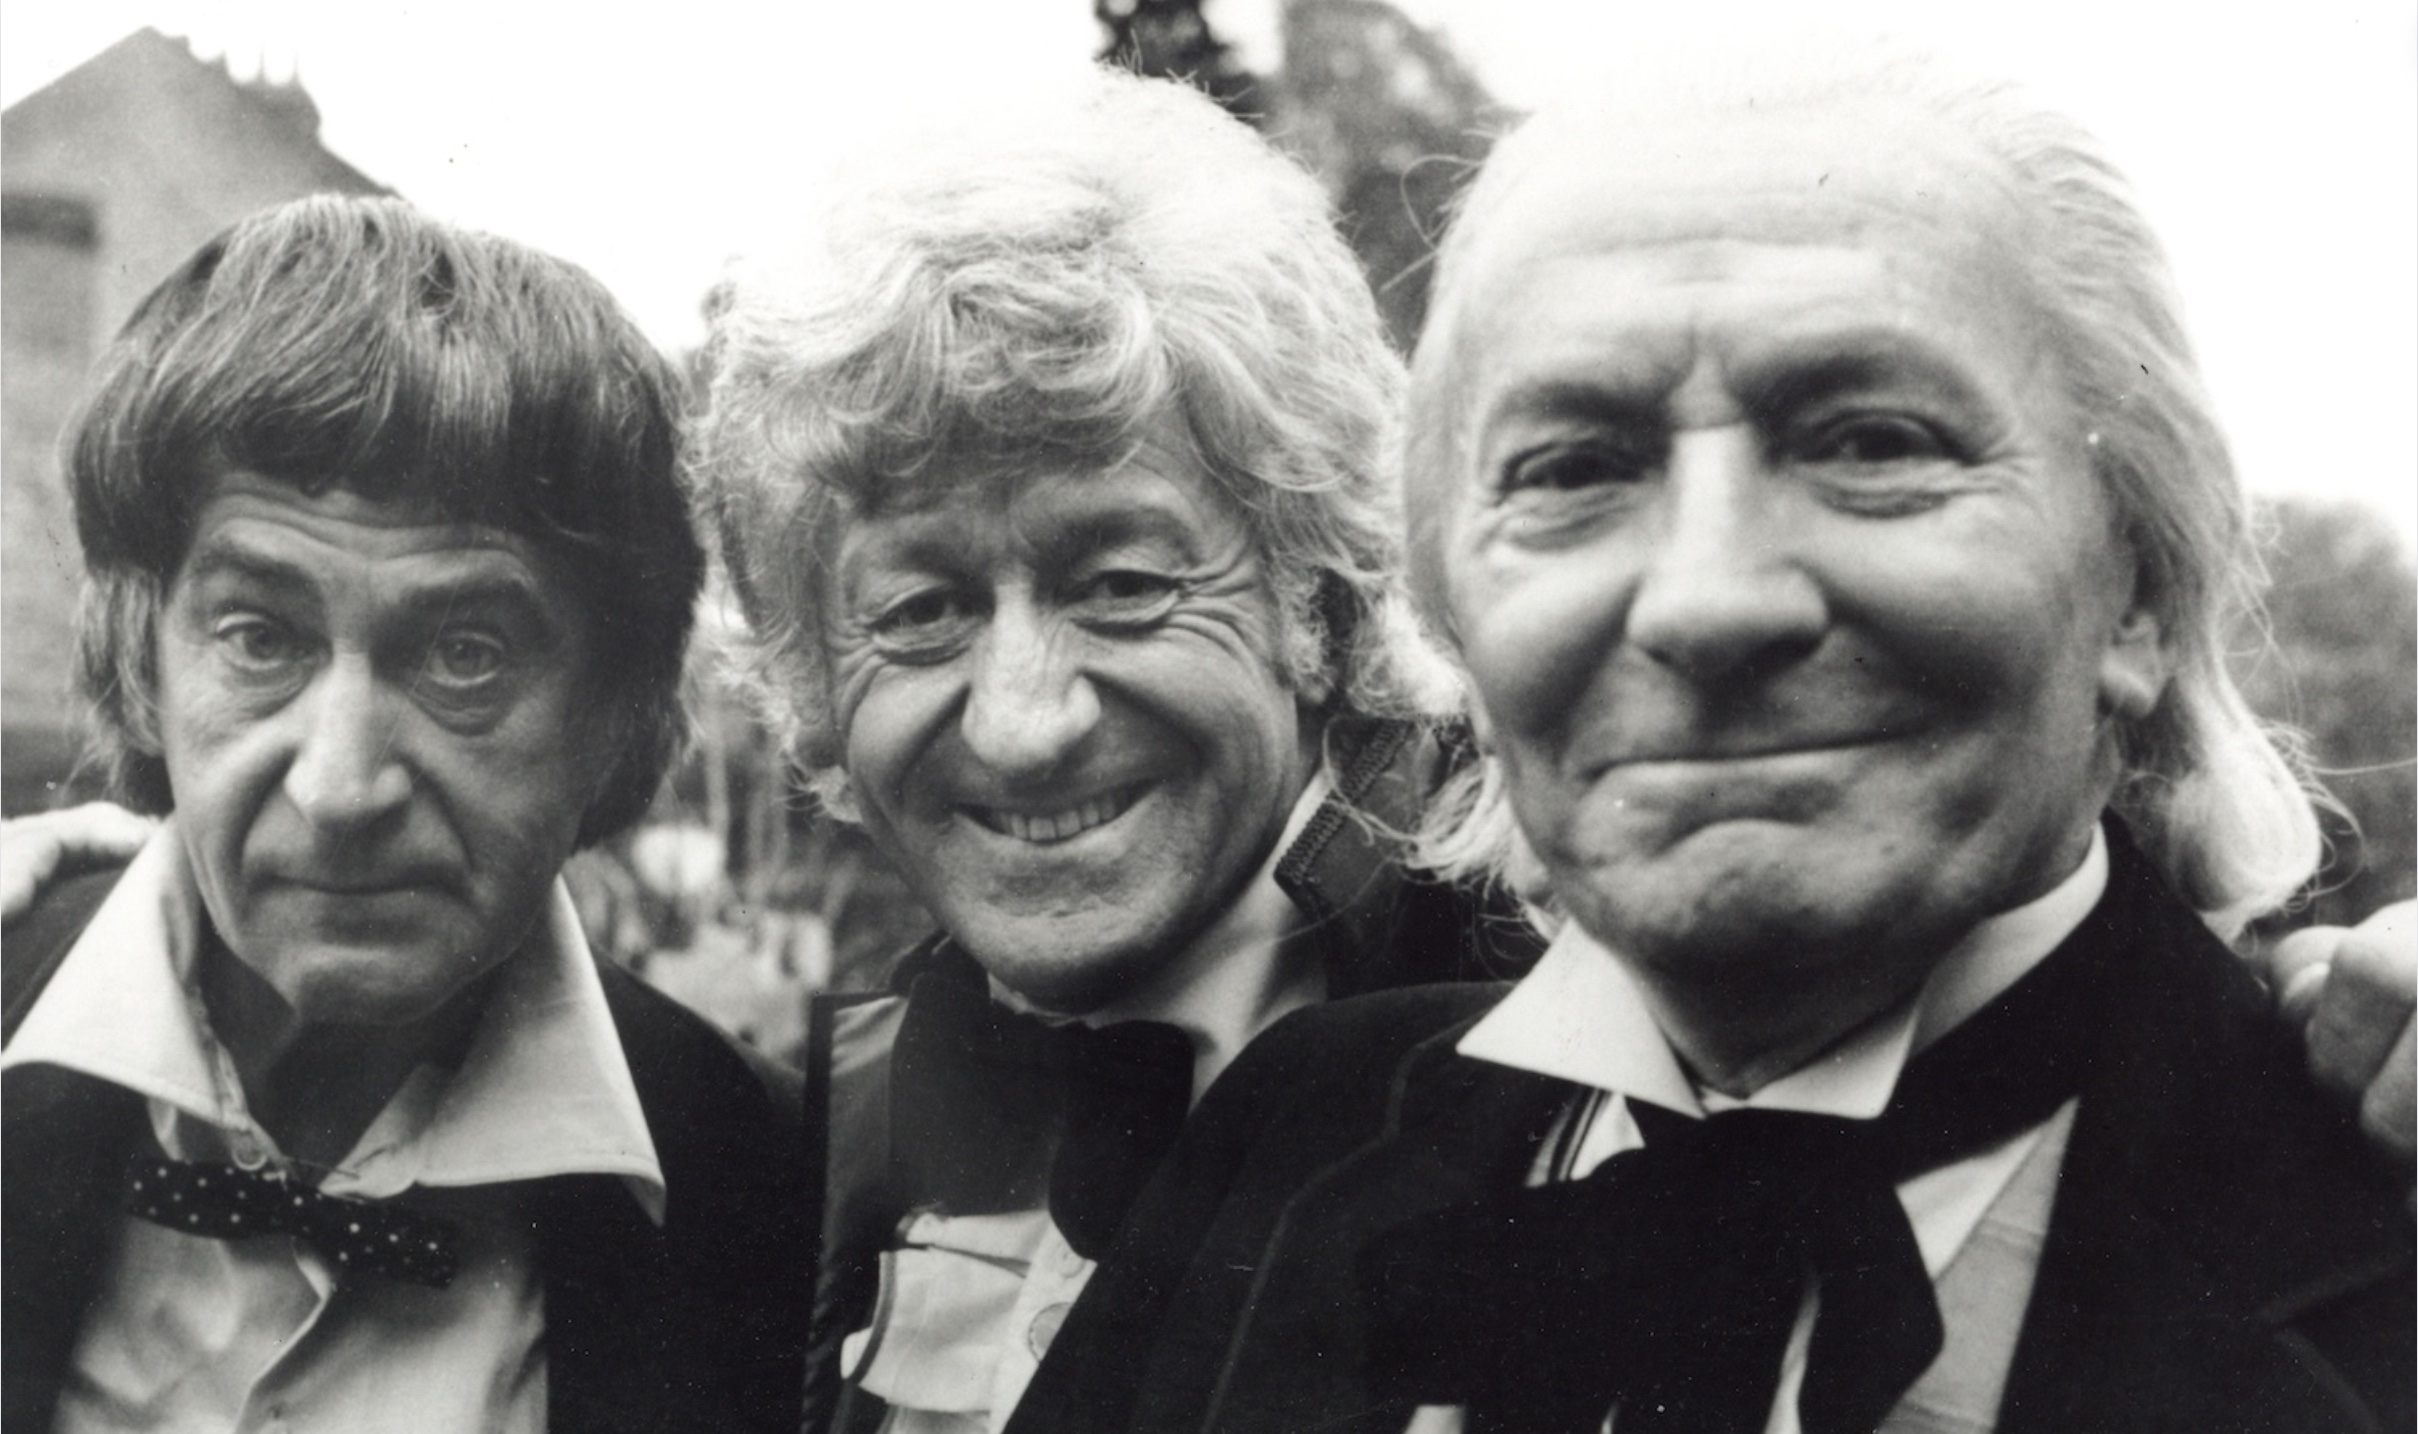 Dr Who star Jon Pertwee estate in London auction – Antique Collecting